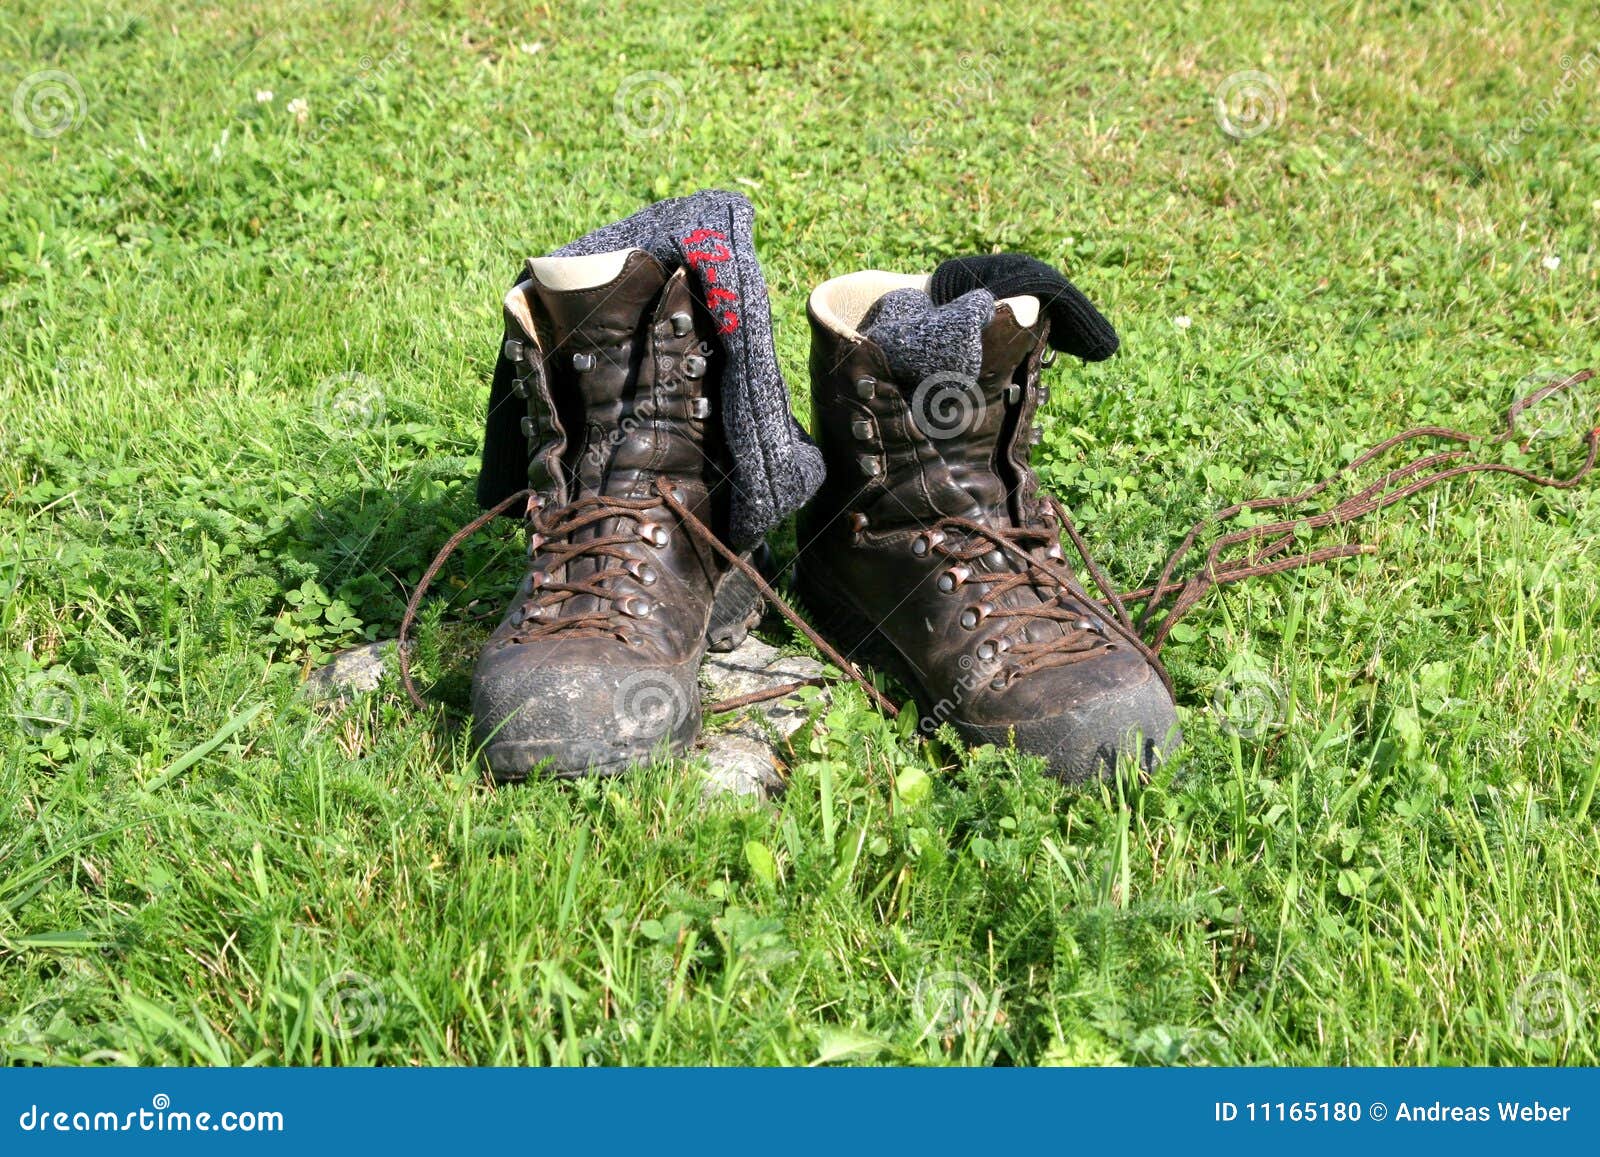 HIKING BOOTS stock photo. Image of nature, outdoors, grass - 11165180